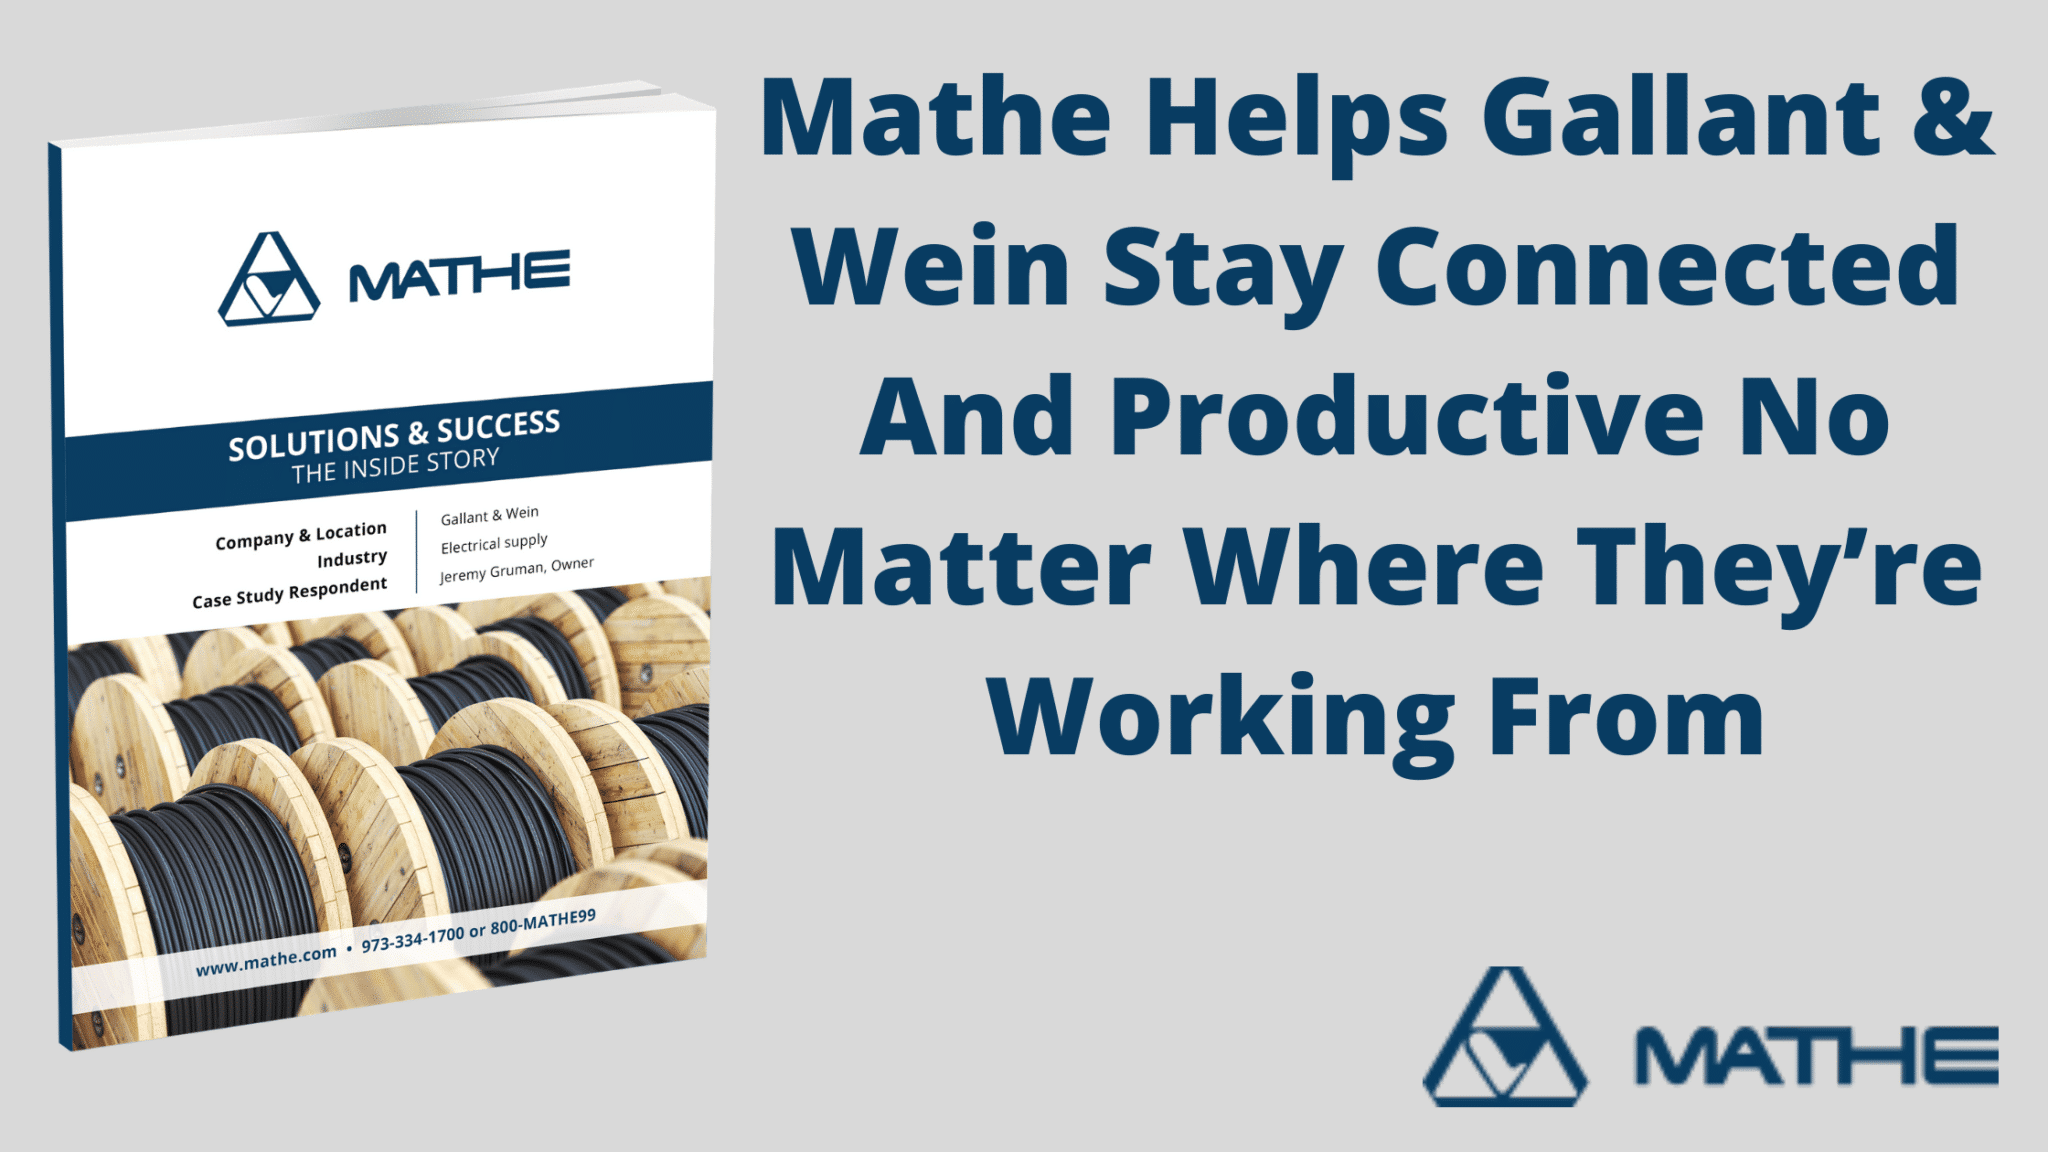 Mathe Helps Gallant & Wein Stay Connected And Productive No Matter Where They’re Working From